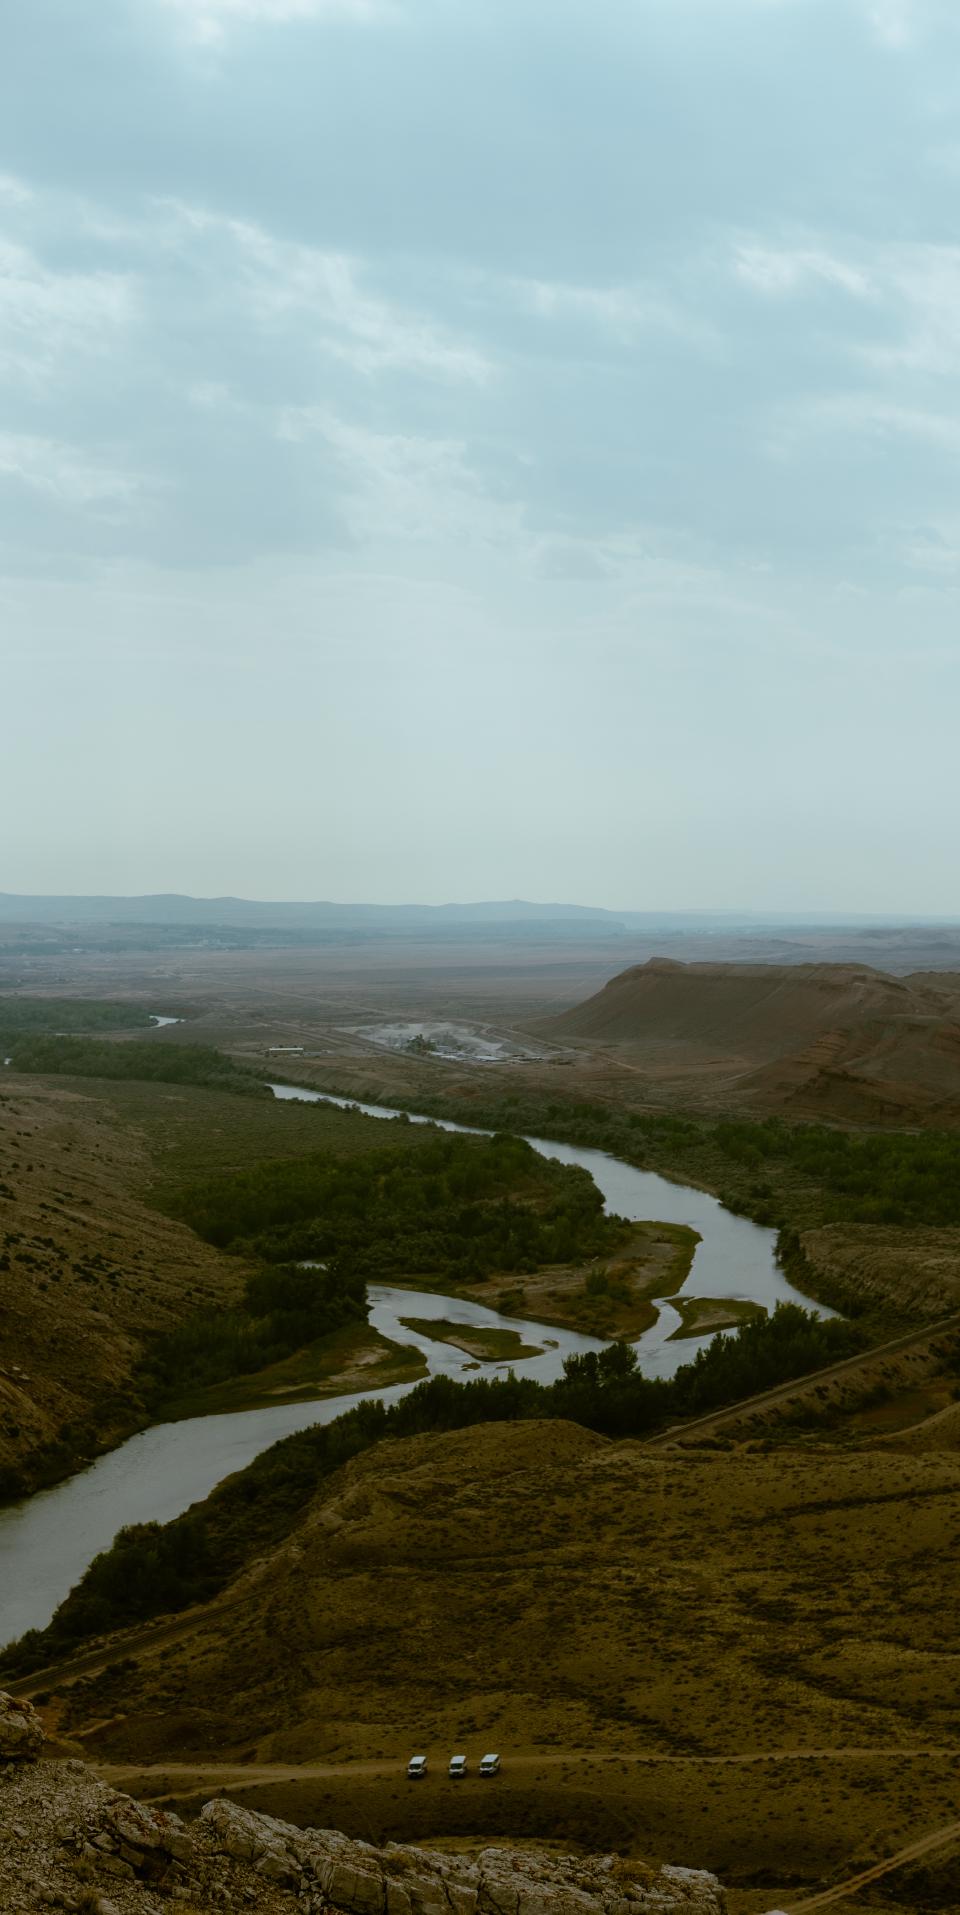 A photo of the Bighorn River as it cuts through Sheep Mountain. The photographer is looking down from a ridge on the mountain.